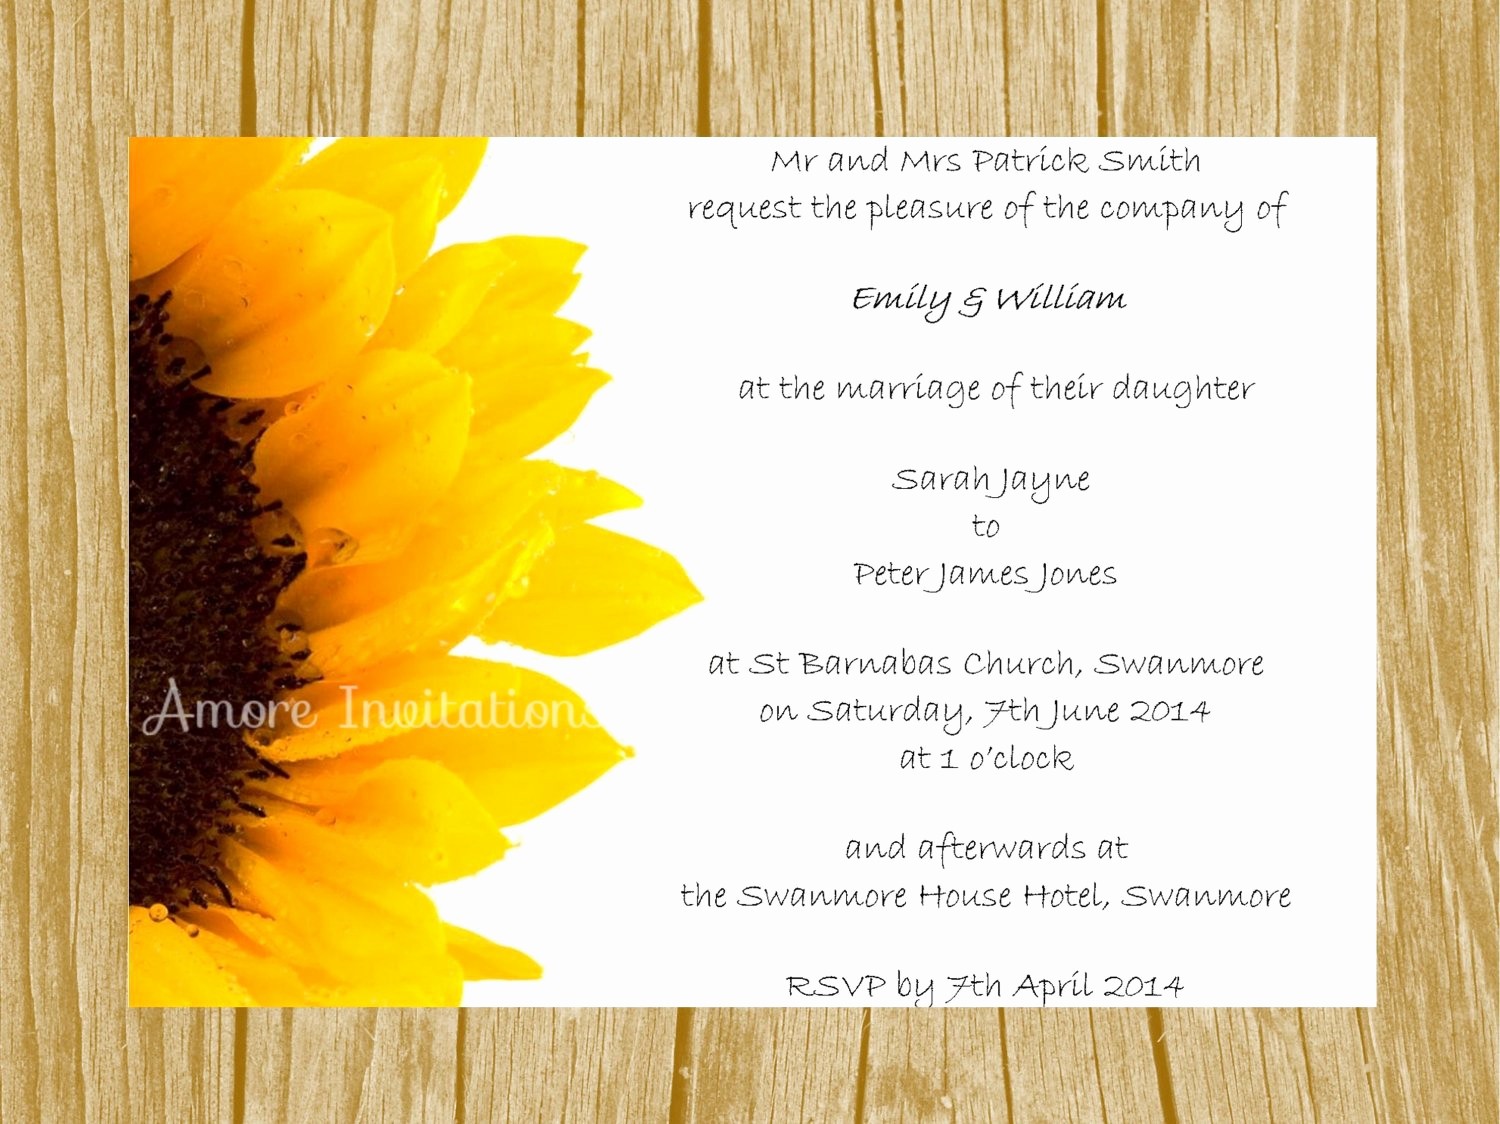 Party Invitations Templates Microsoft Word Awesome Microsoft Word Party Invitation Template